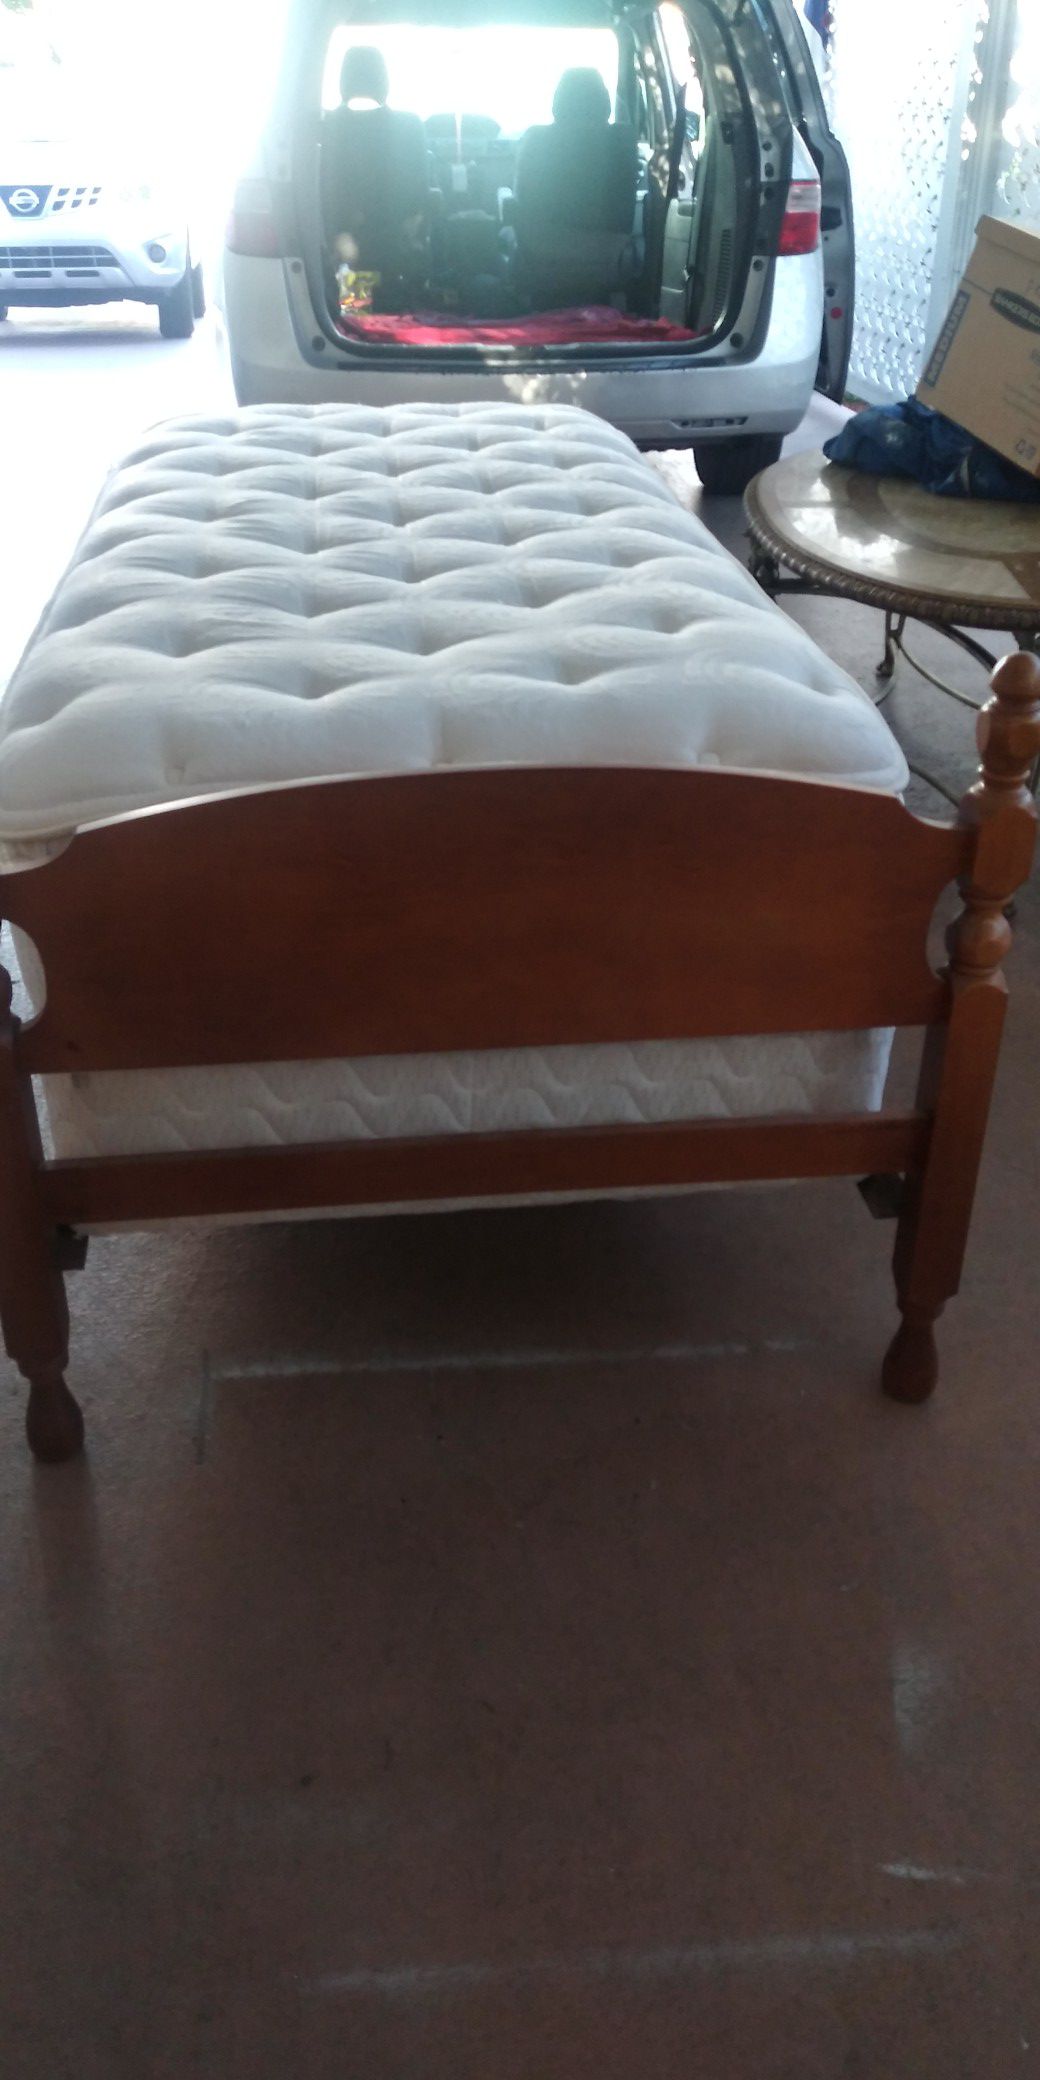 !! Good condition Bed with Pillow Top matress, Box Spring and Metal/Wood Frame!! Delivery included in the price!!